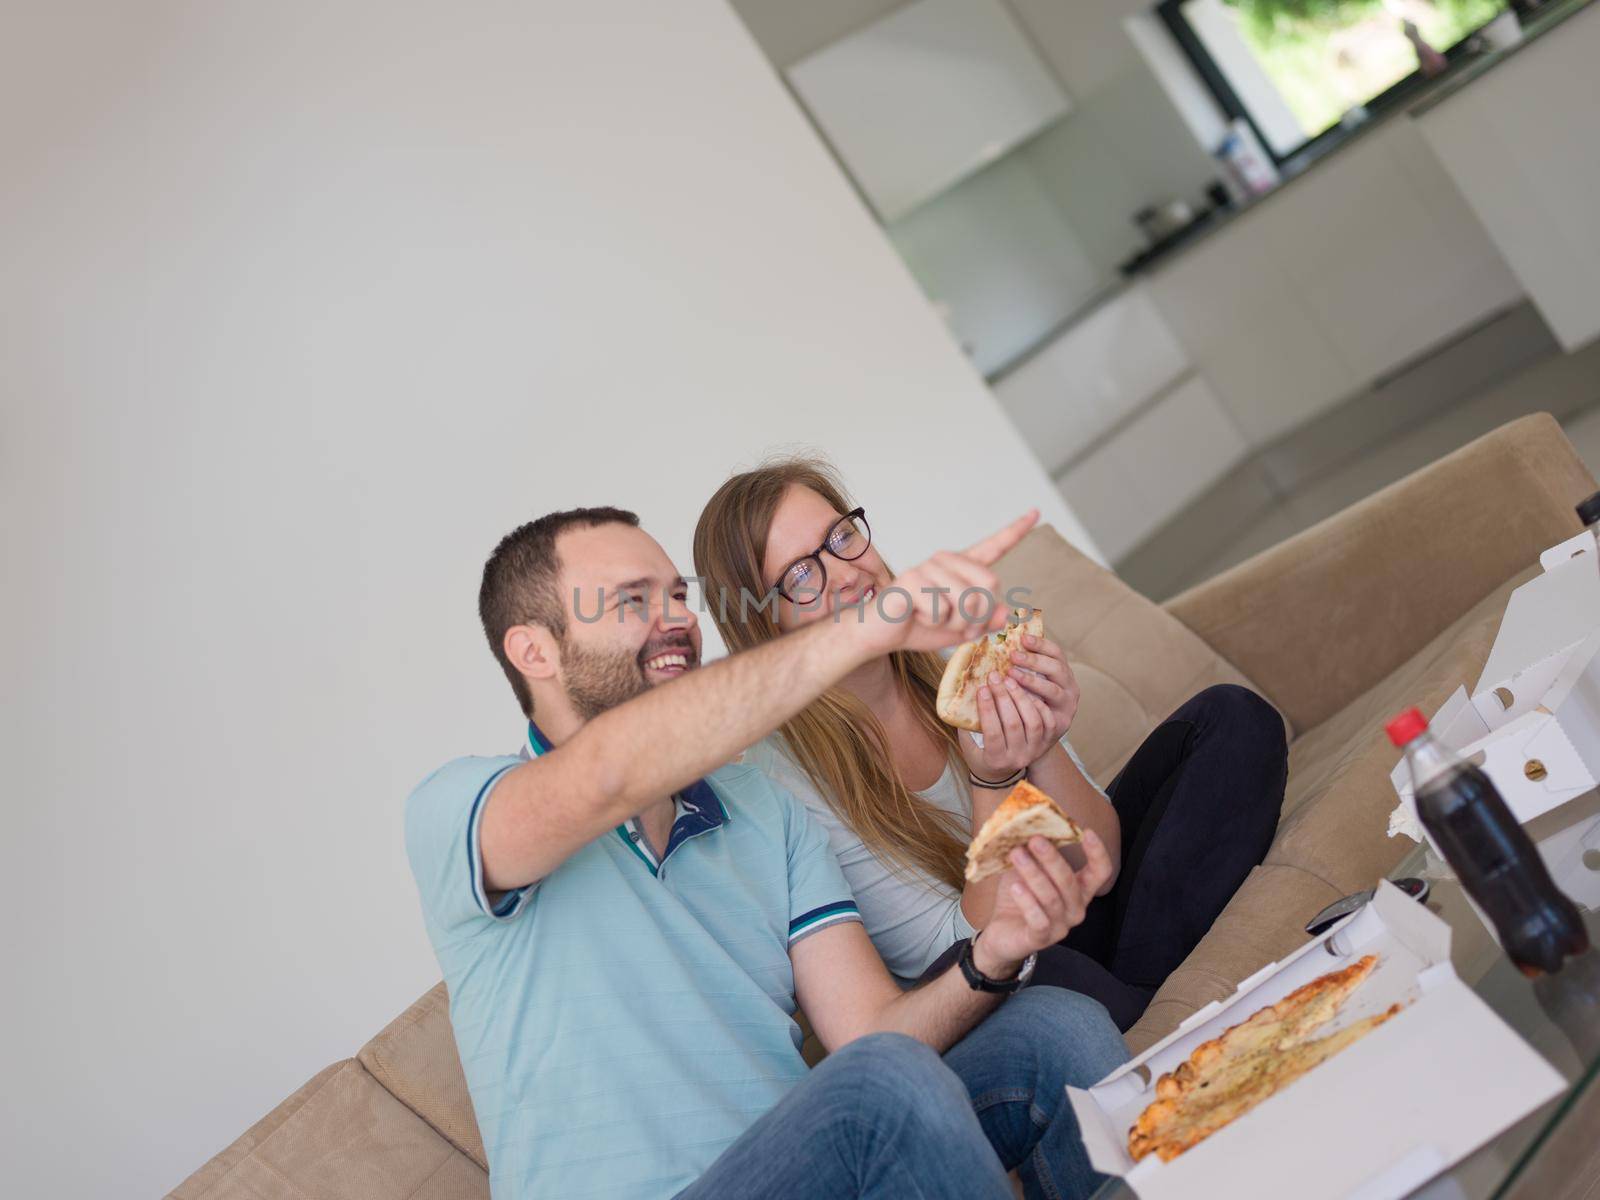 young handsome couple cheerfully spending time while eating pizza in their luxury home villa